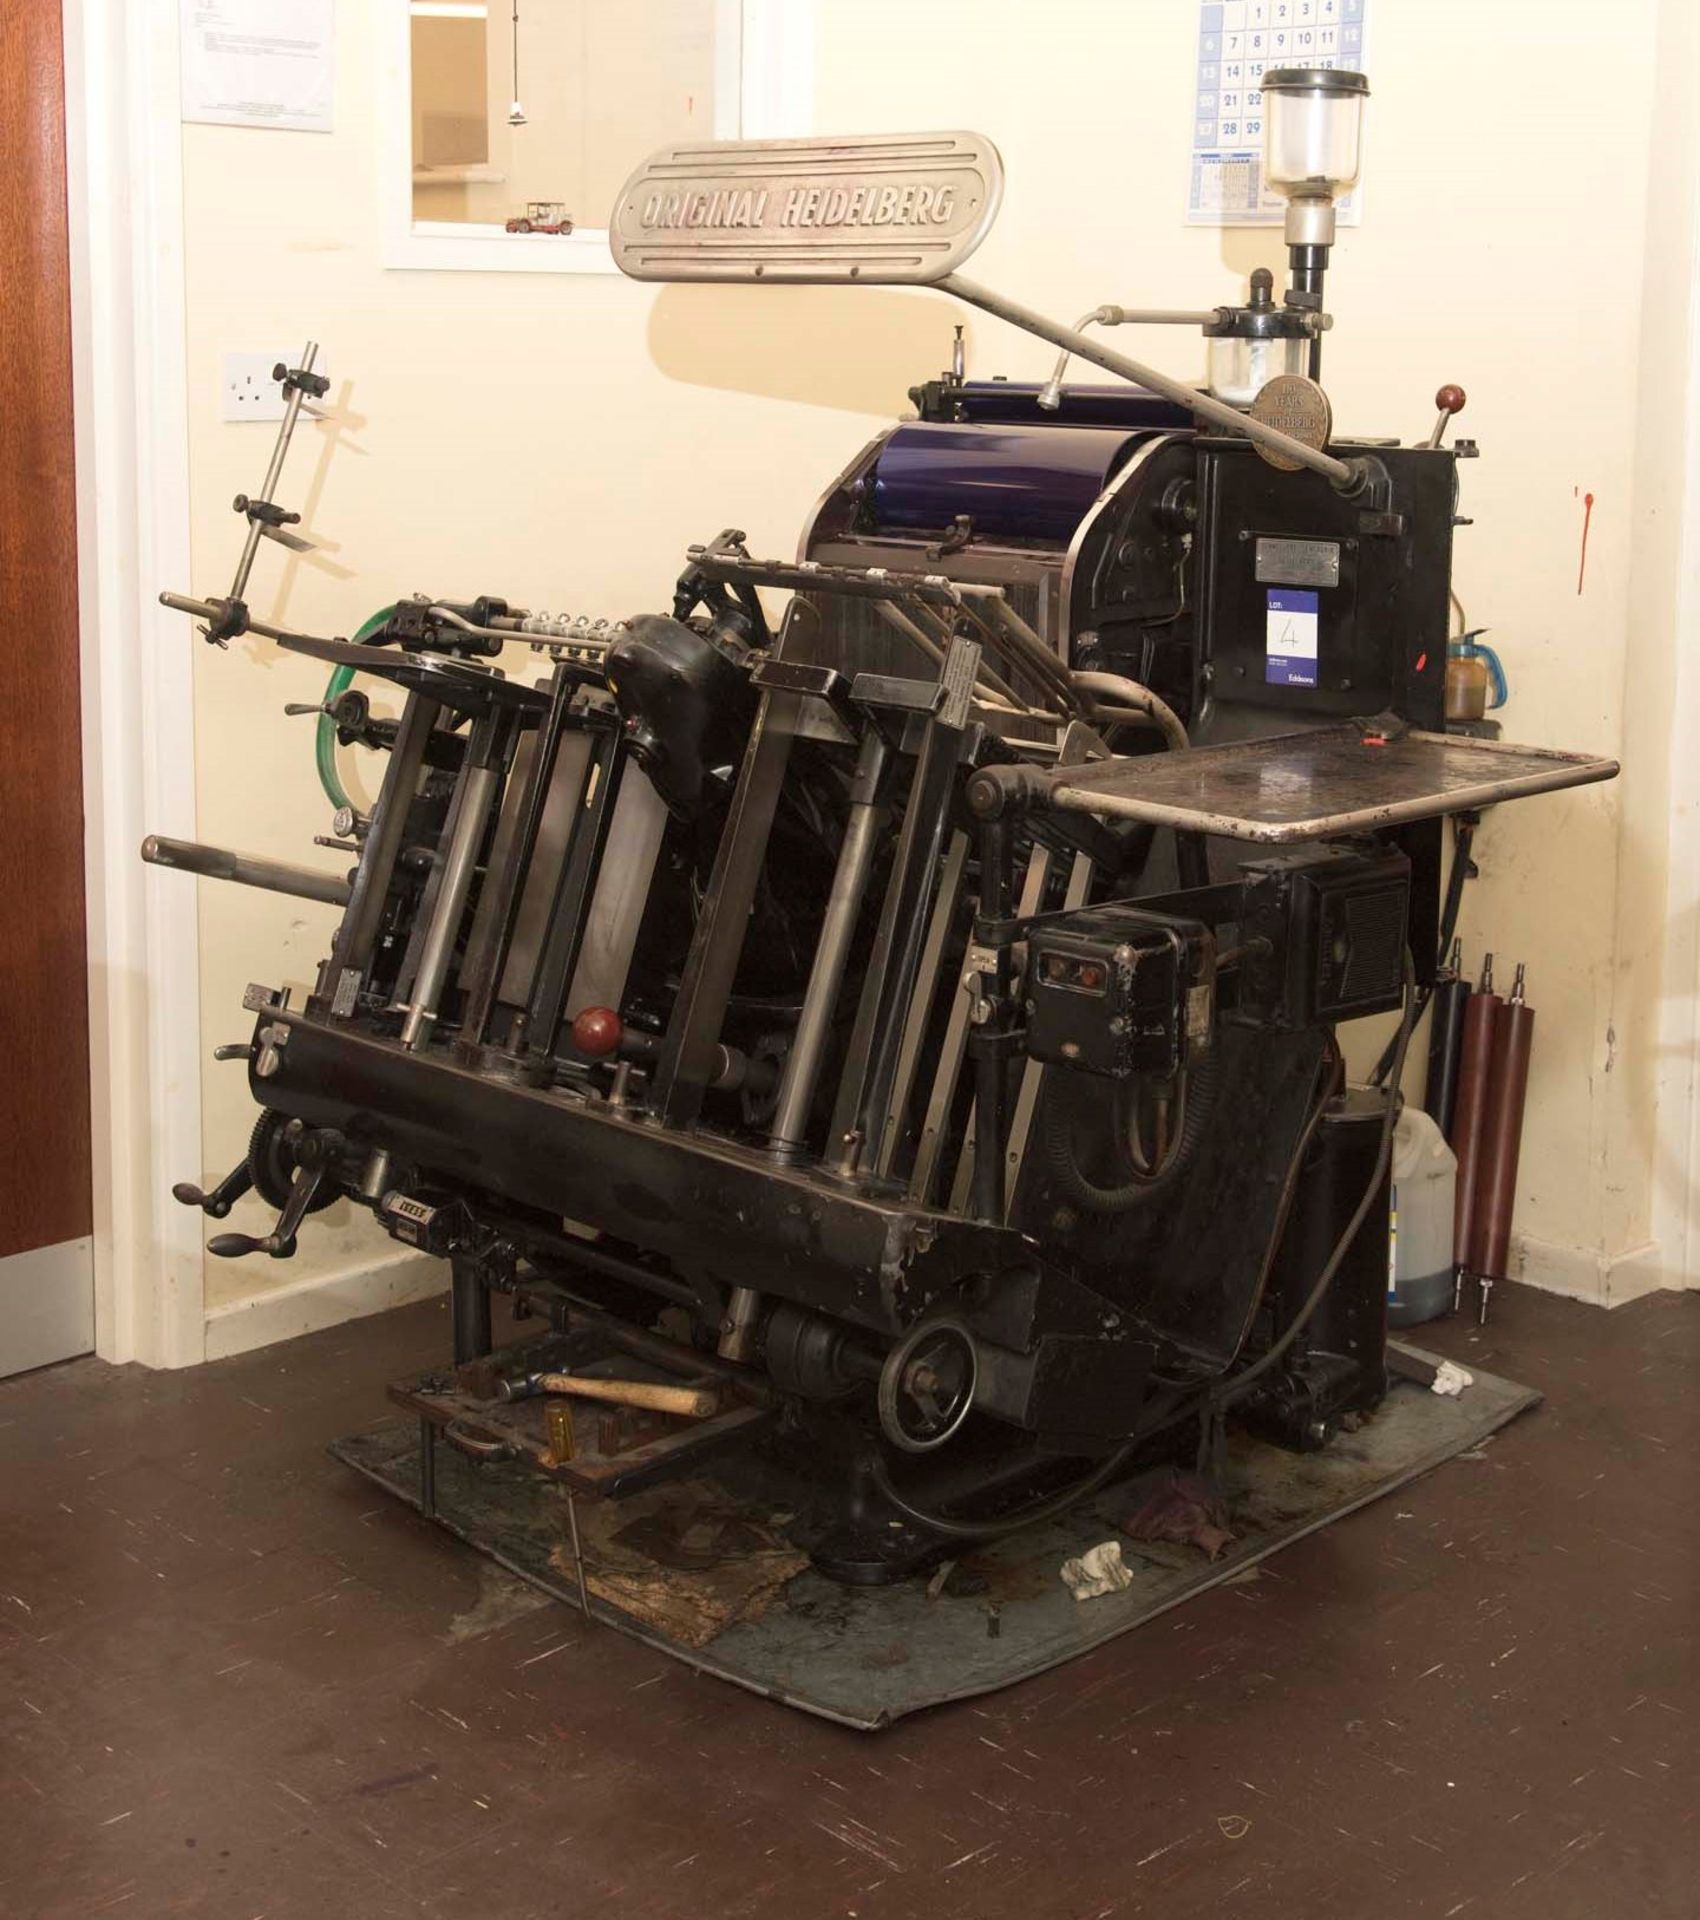 Heidelberg 10x15 platen Serial No. T 129 937 E. With 6 Formes